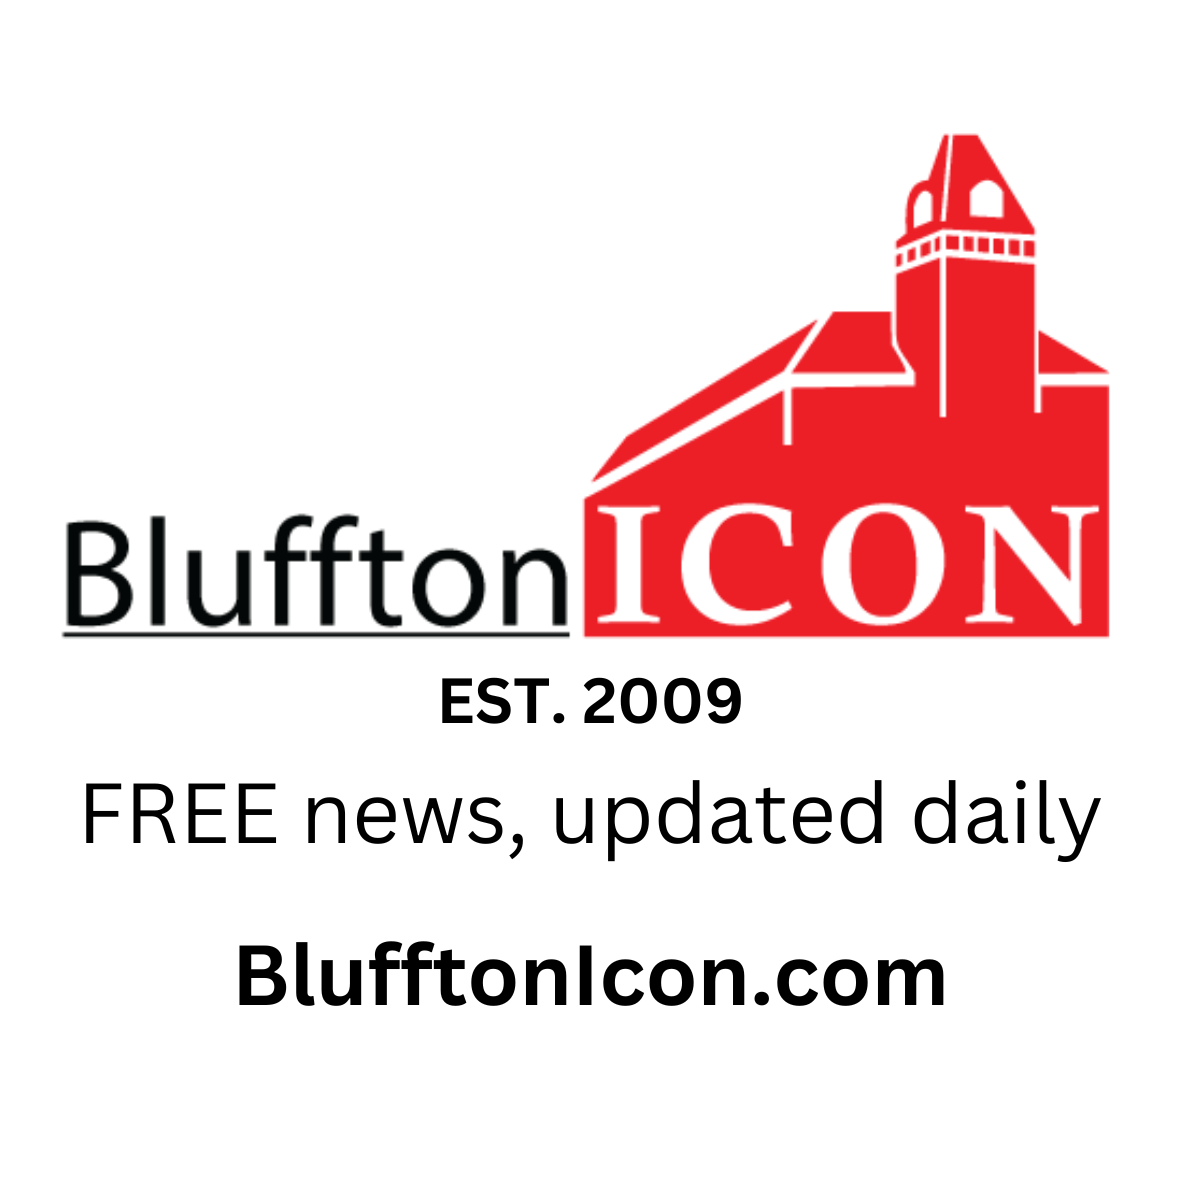 Cemetery board meets at 2:00 p.m. on January 3 | Bluffton Icon